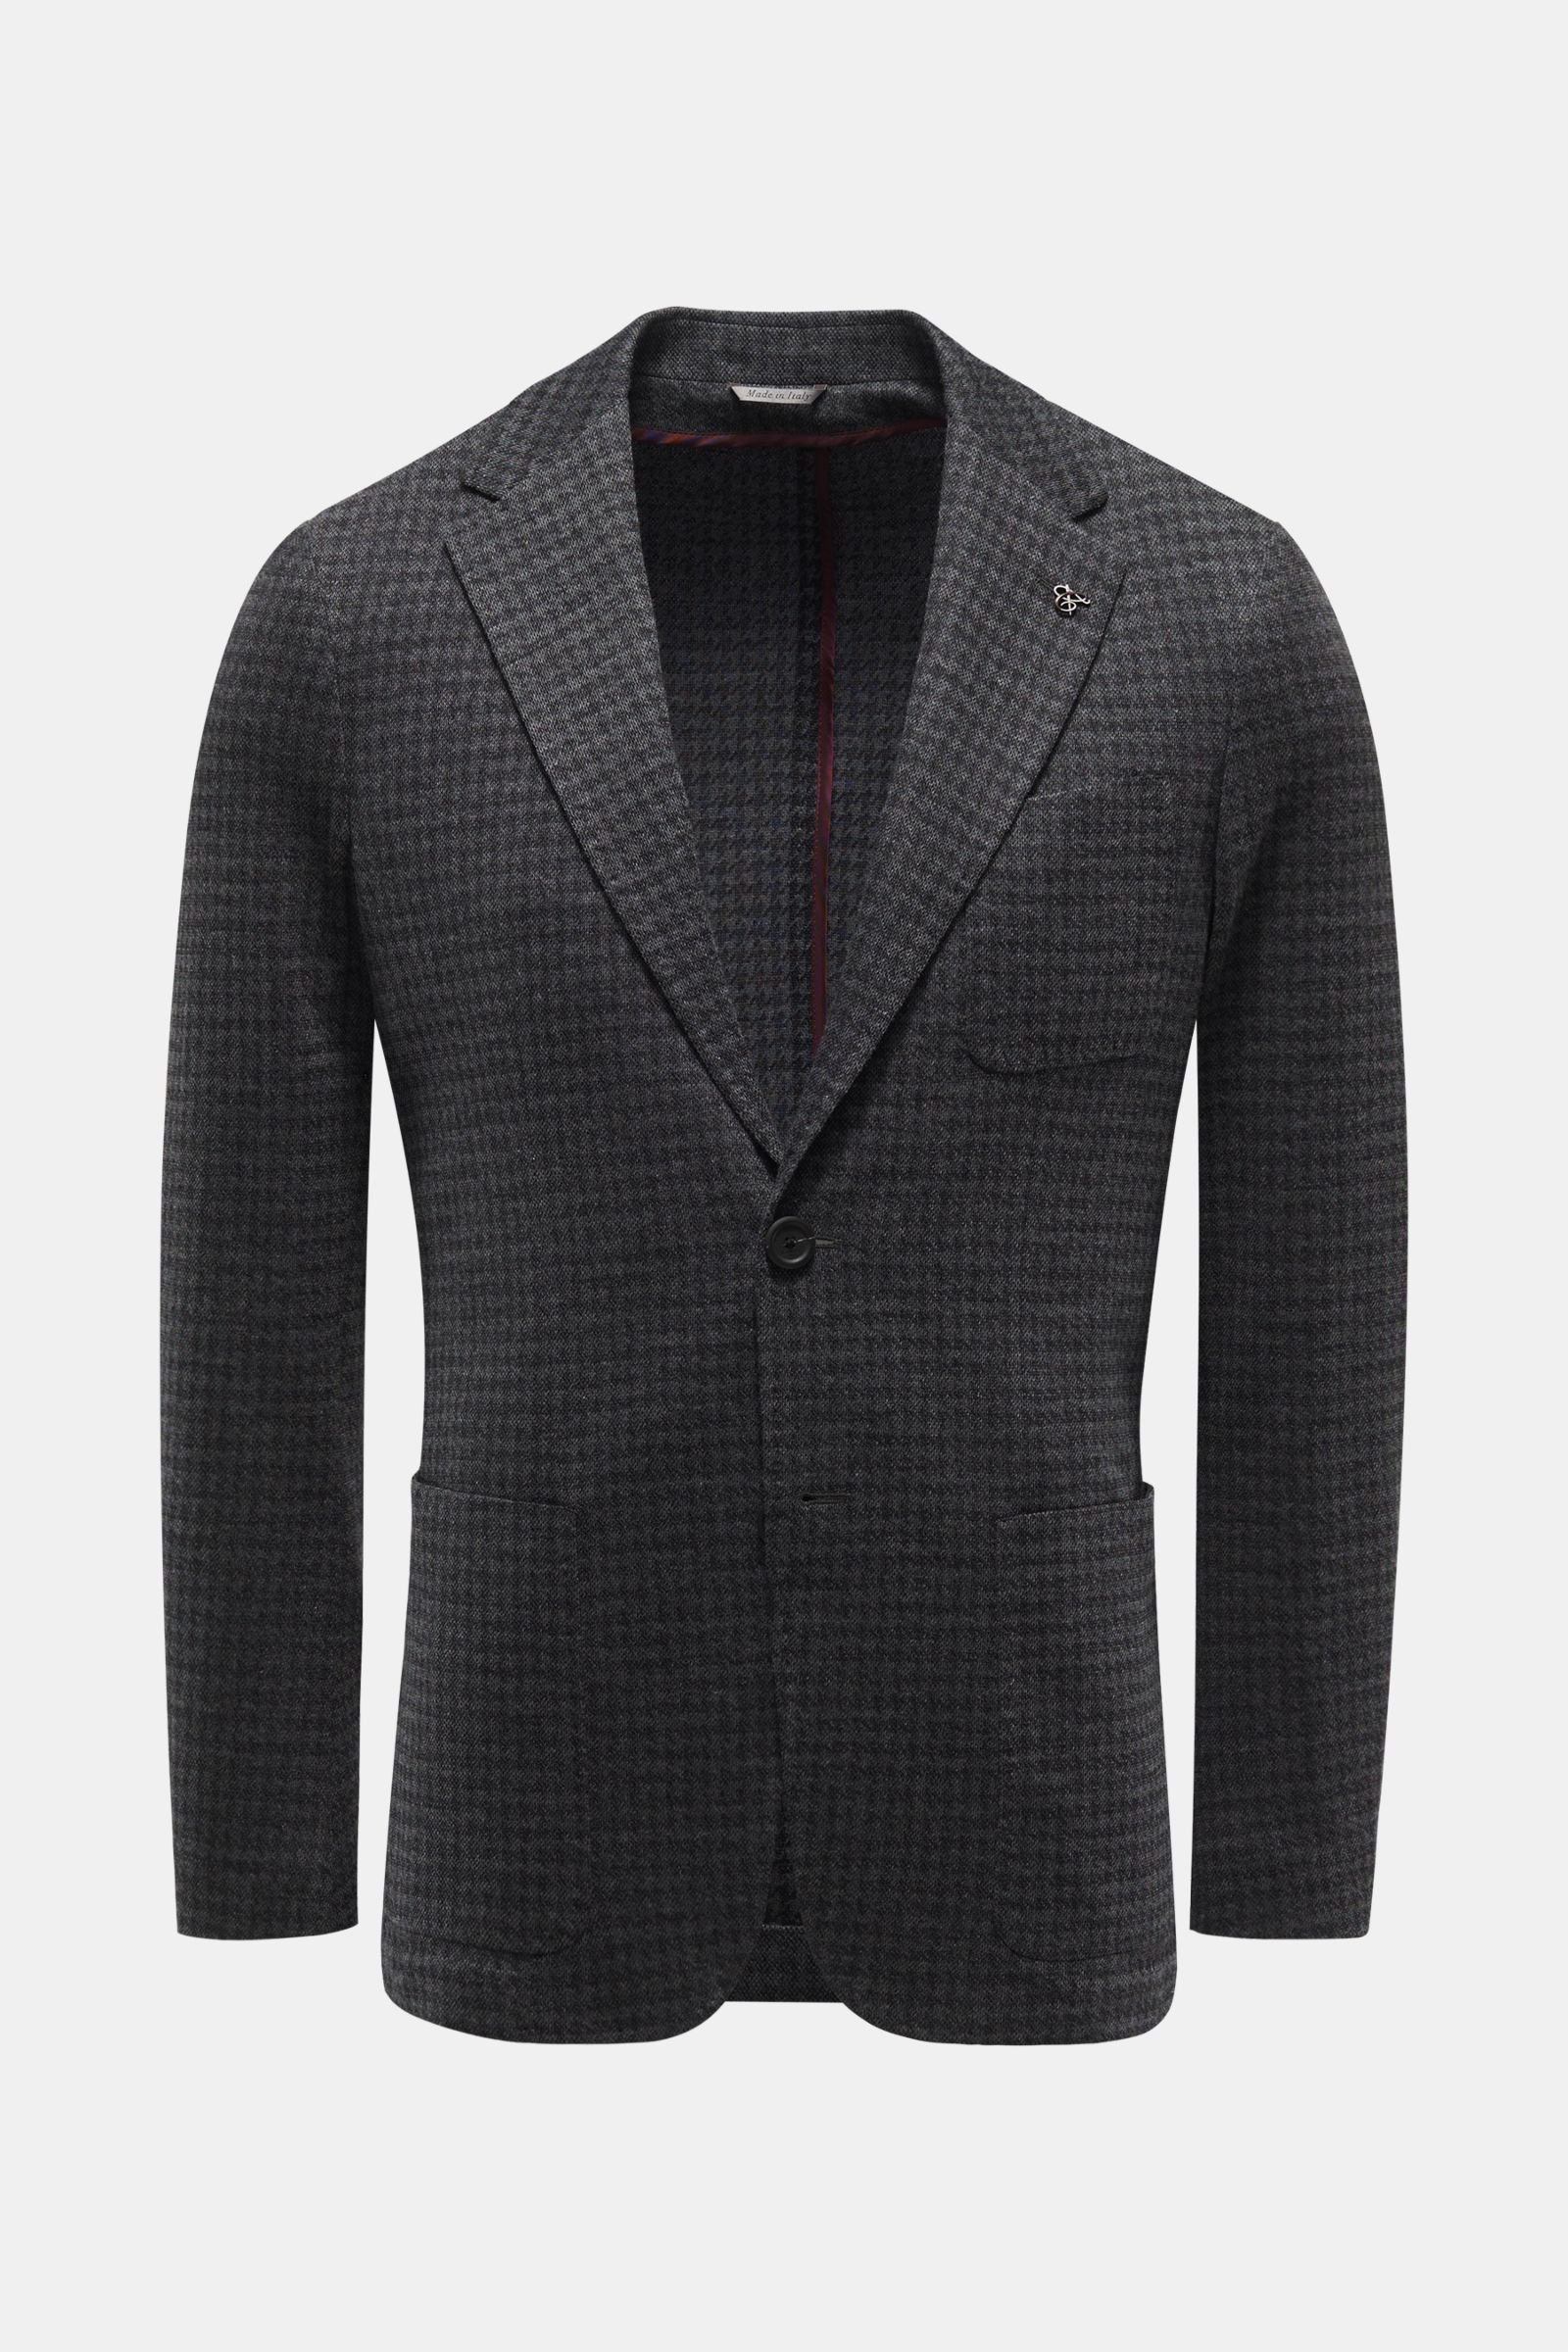 Smart-casual jacket anthracite checked